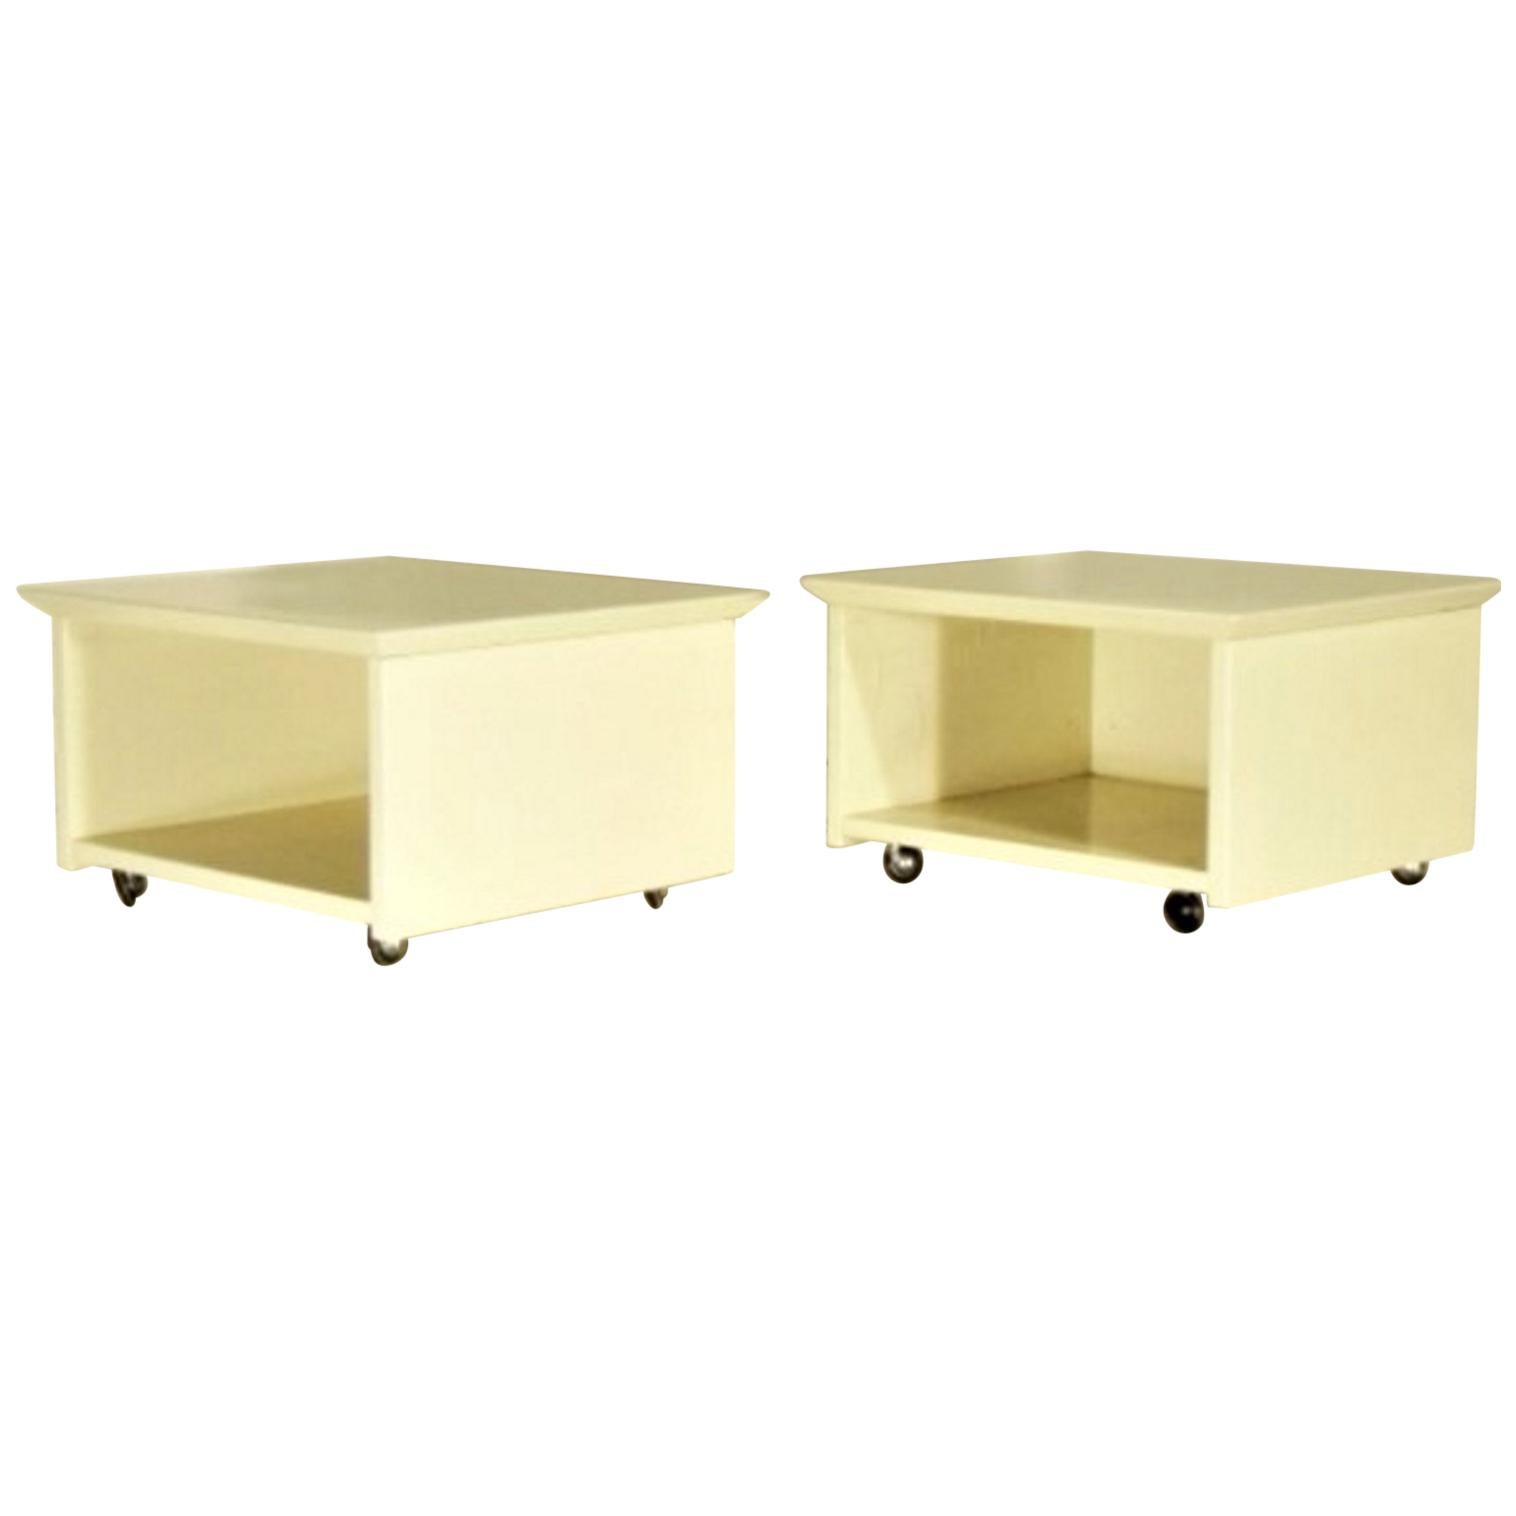 Claudio Salocchi 1975 Set of Two Nightstands Sand Glossy Lacquer 45° Cut Sormani